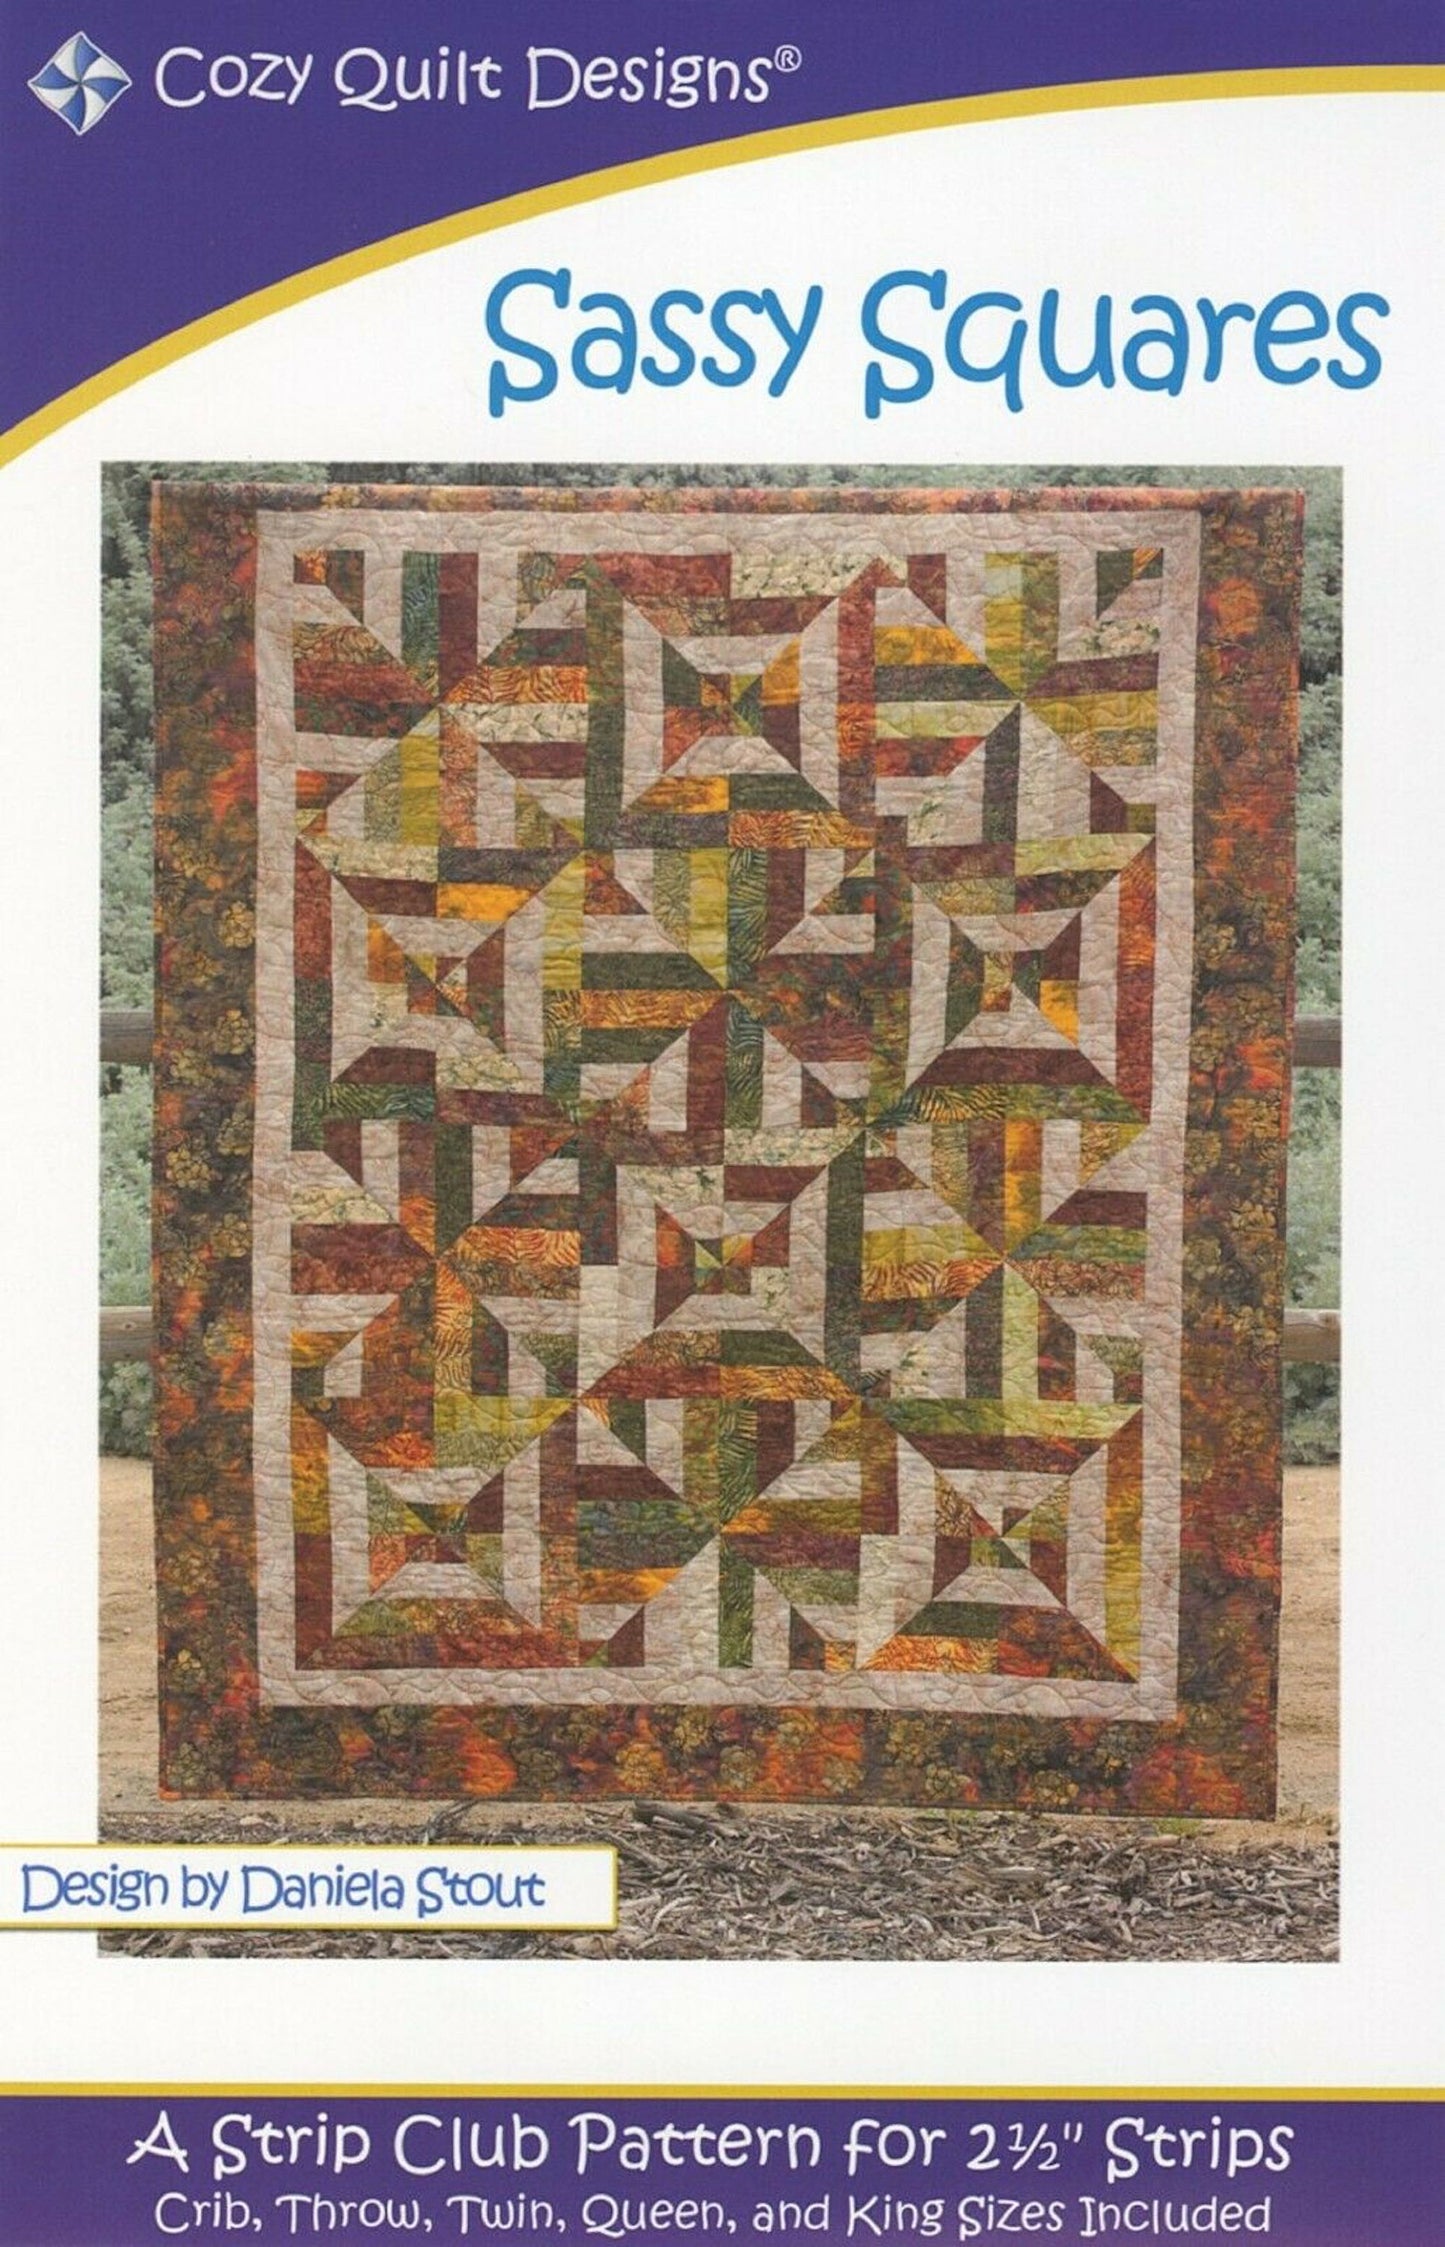 Sassy Squares Quilt Pattern by Cozy Quilt Designs